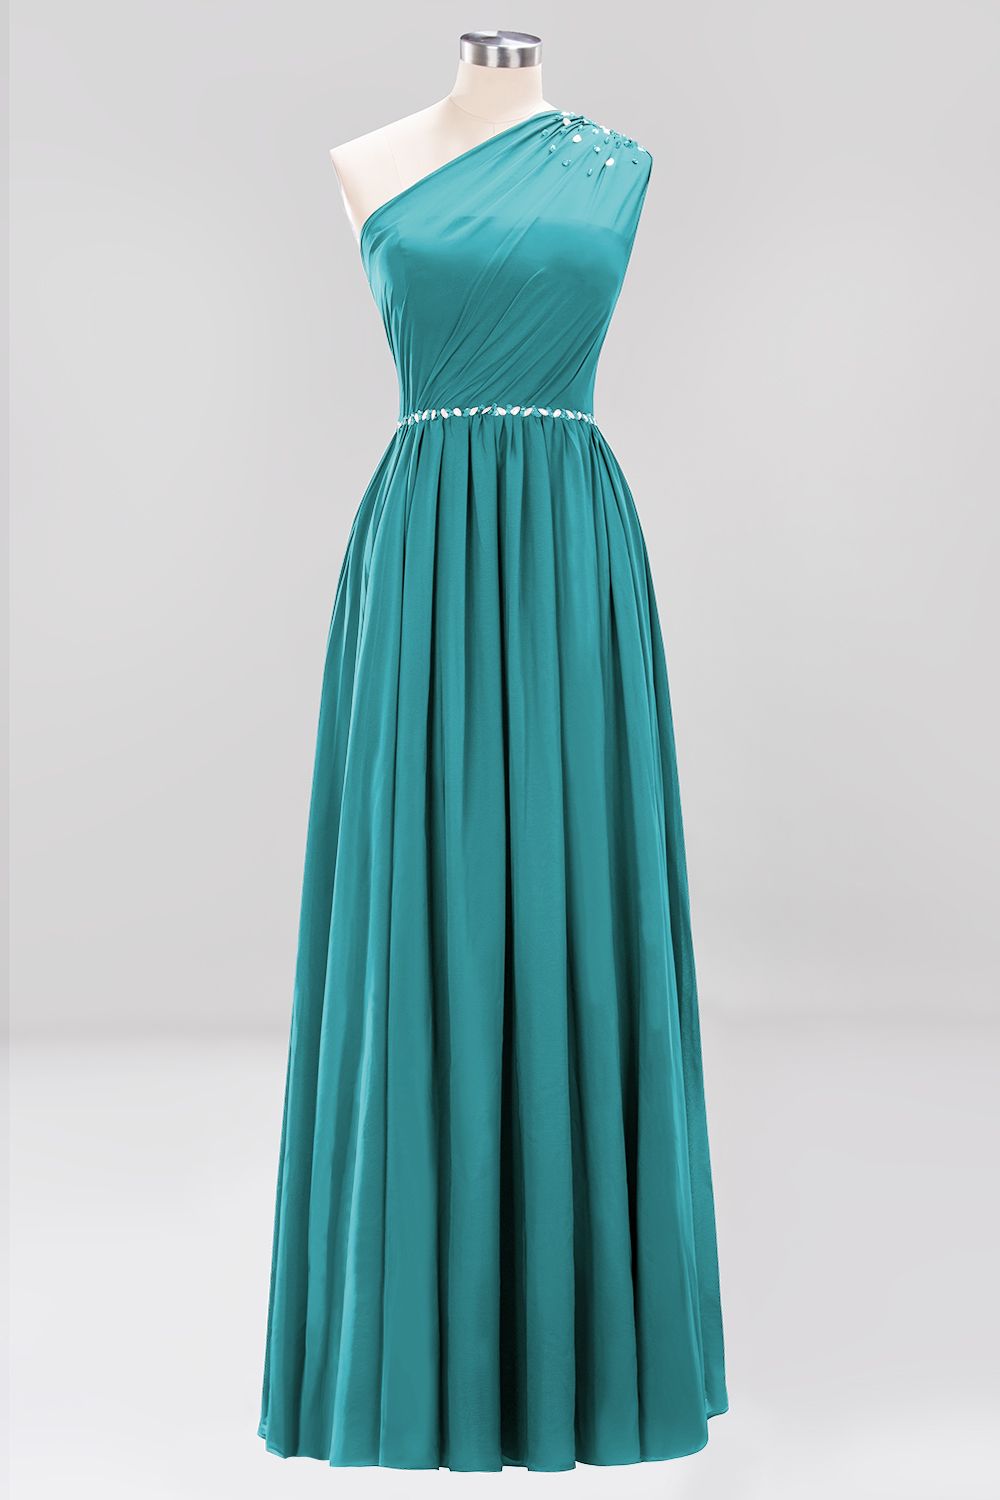 Modest One-shoulder Royal Blue Affordable Bridesmaid Dress with Beadings